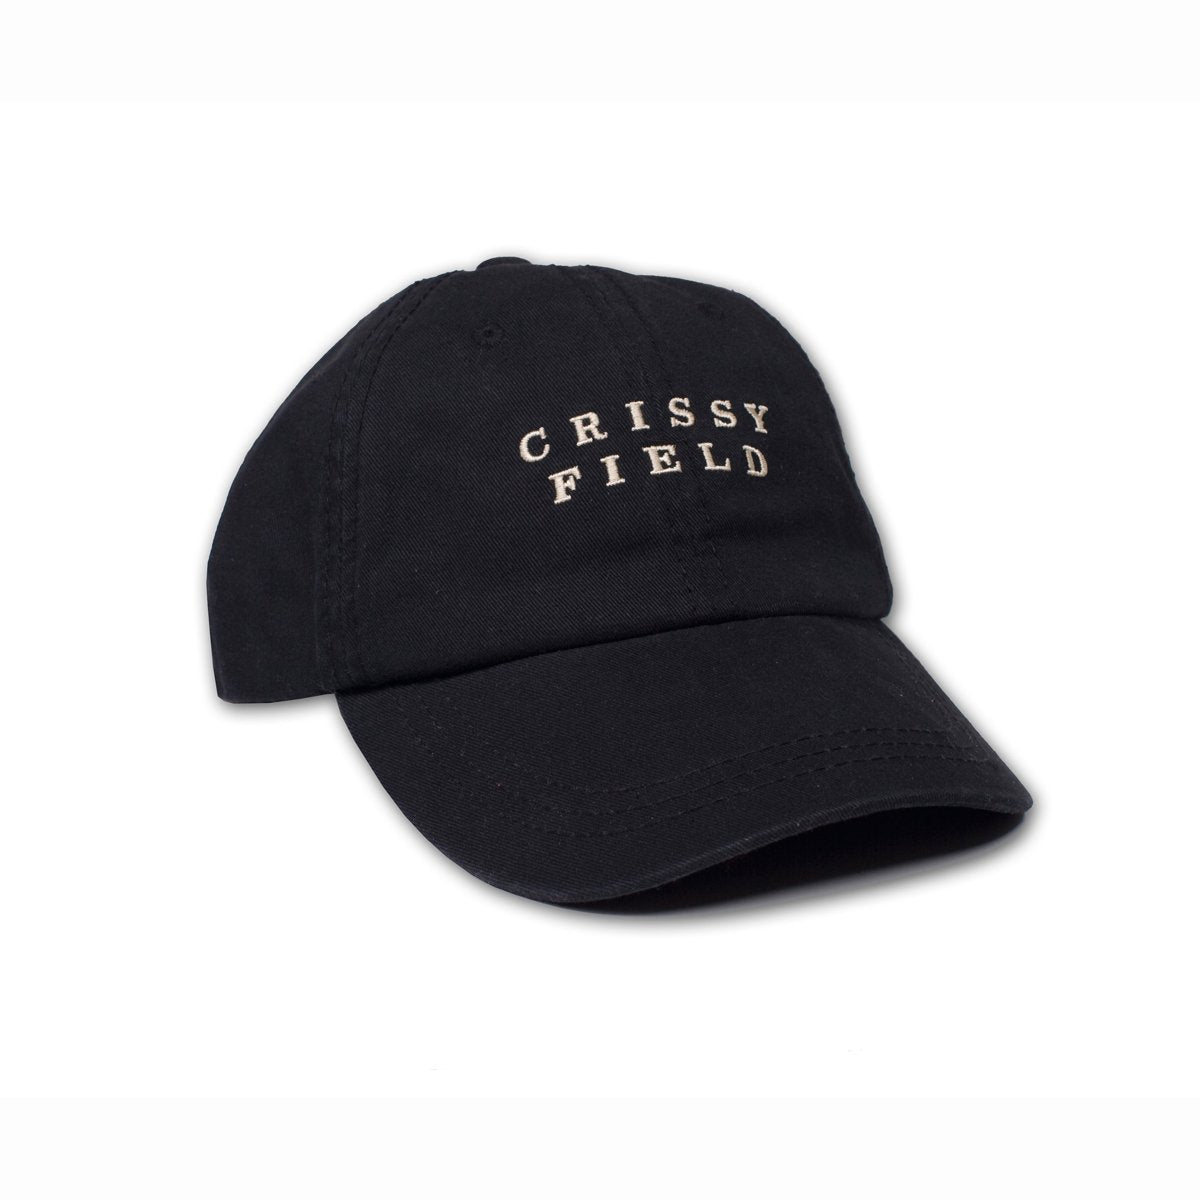 Black baseball cap with white embroidered Crissy Field text on front panels.